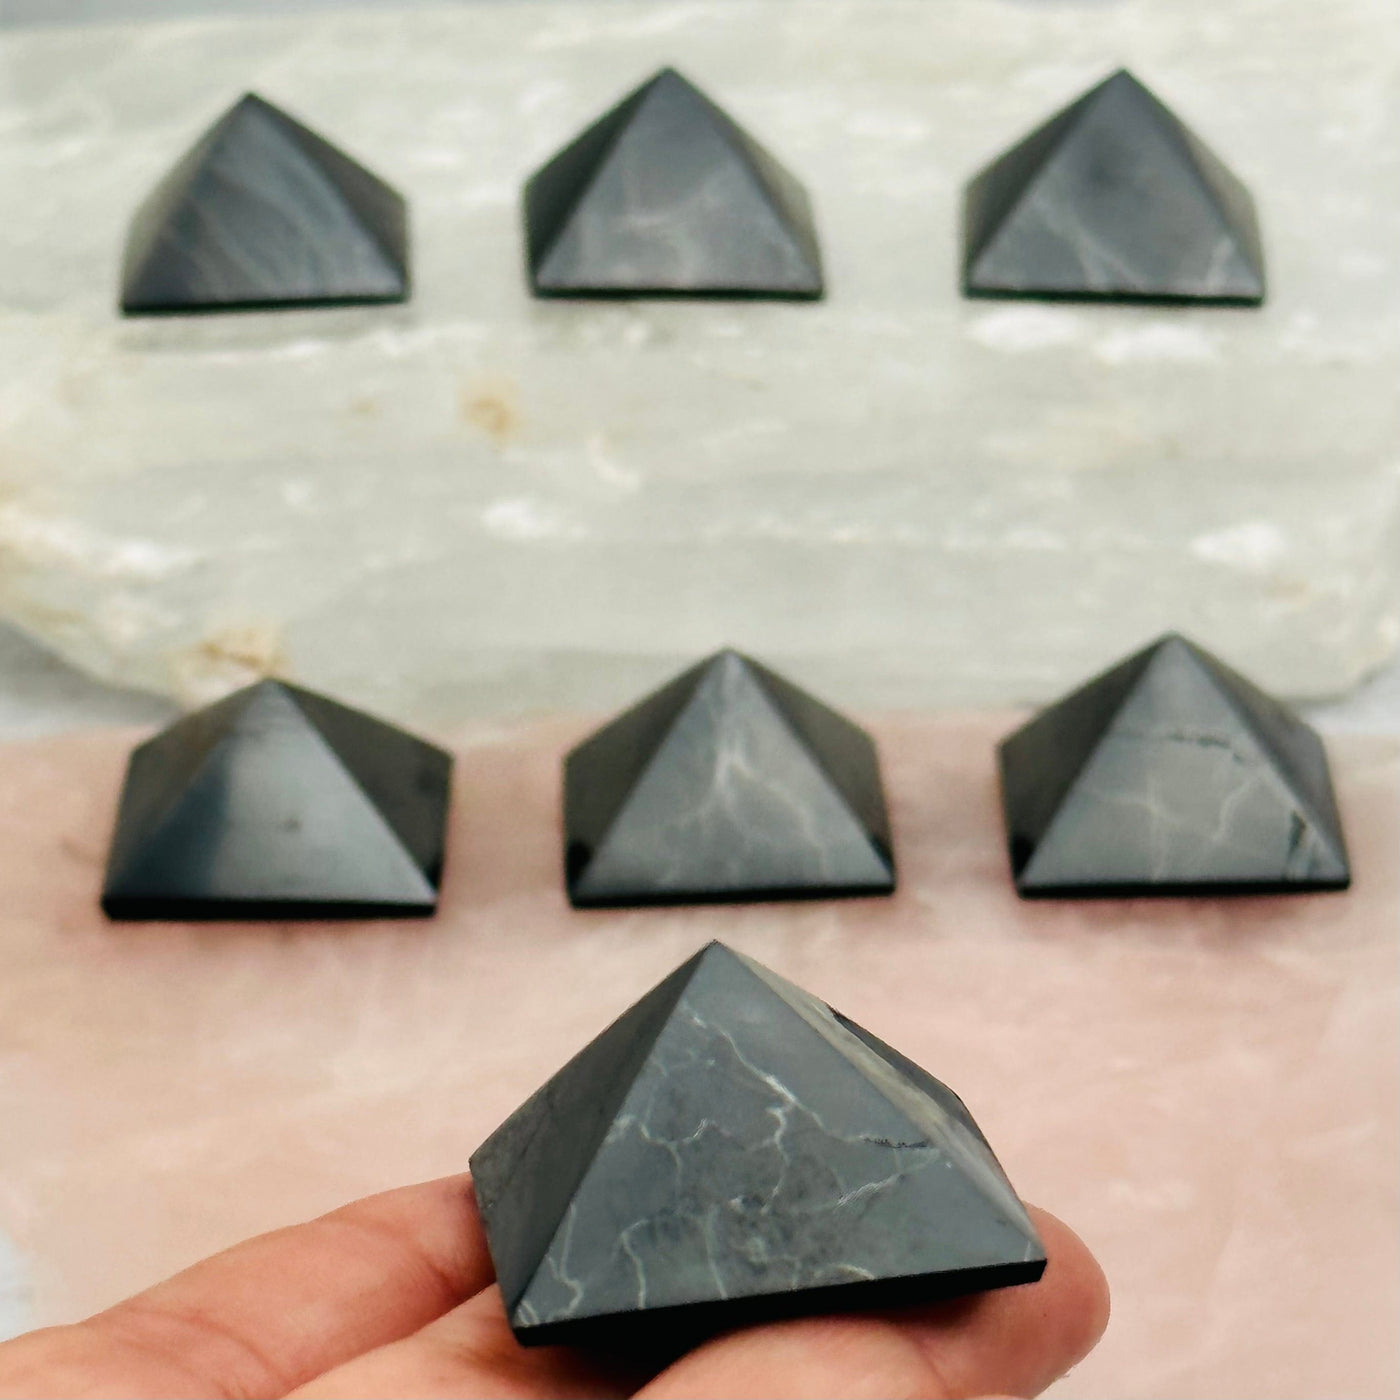 Shungite Pyramid in hand for size reference 